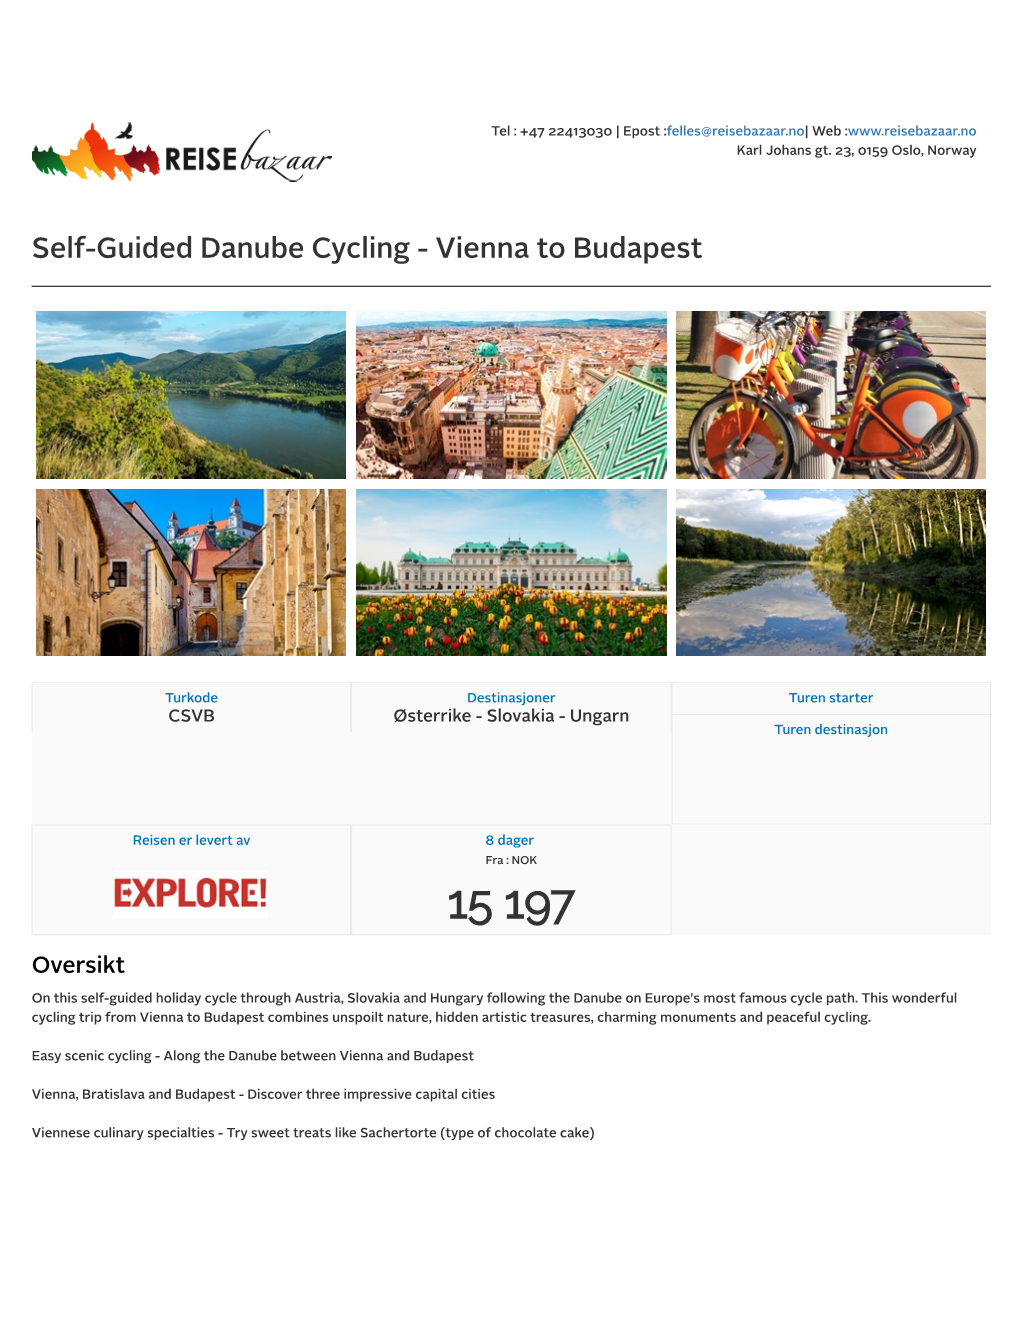 Self-Guided Danube Cycling - Vienna to Budapest